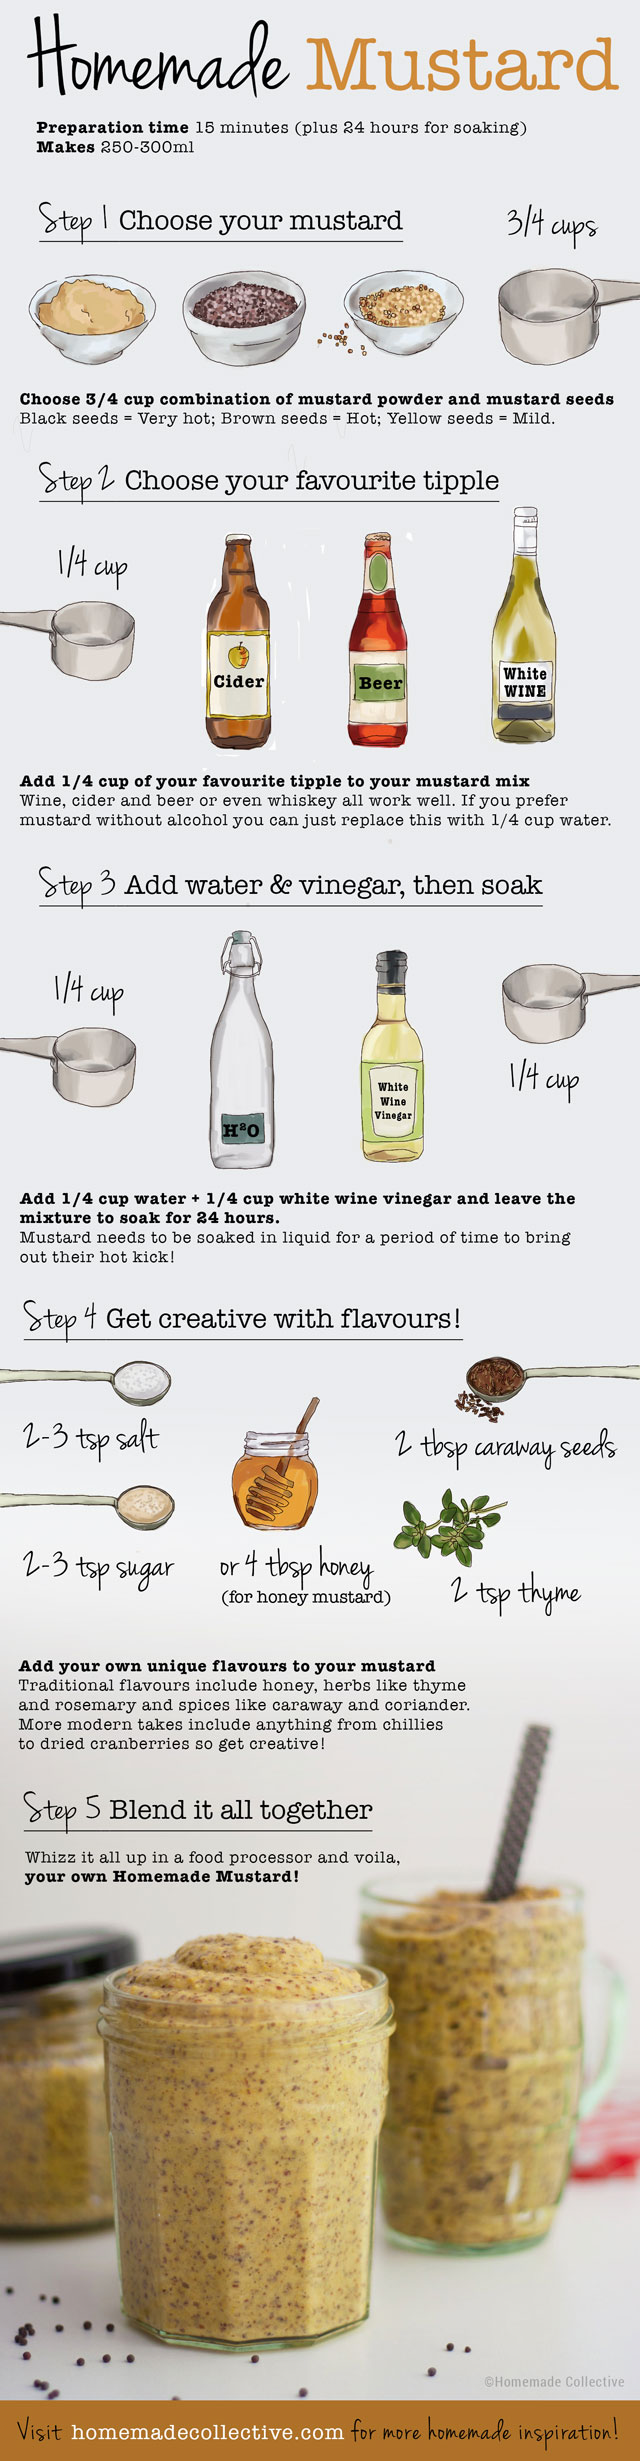 Make your own mustard!